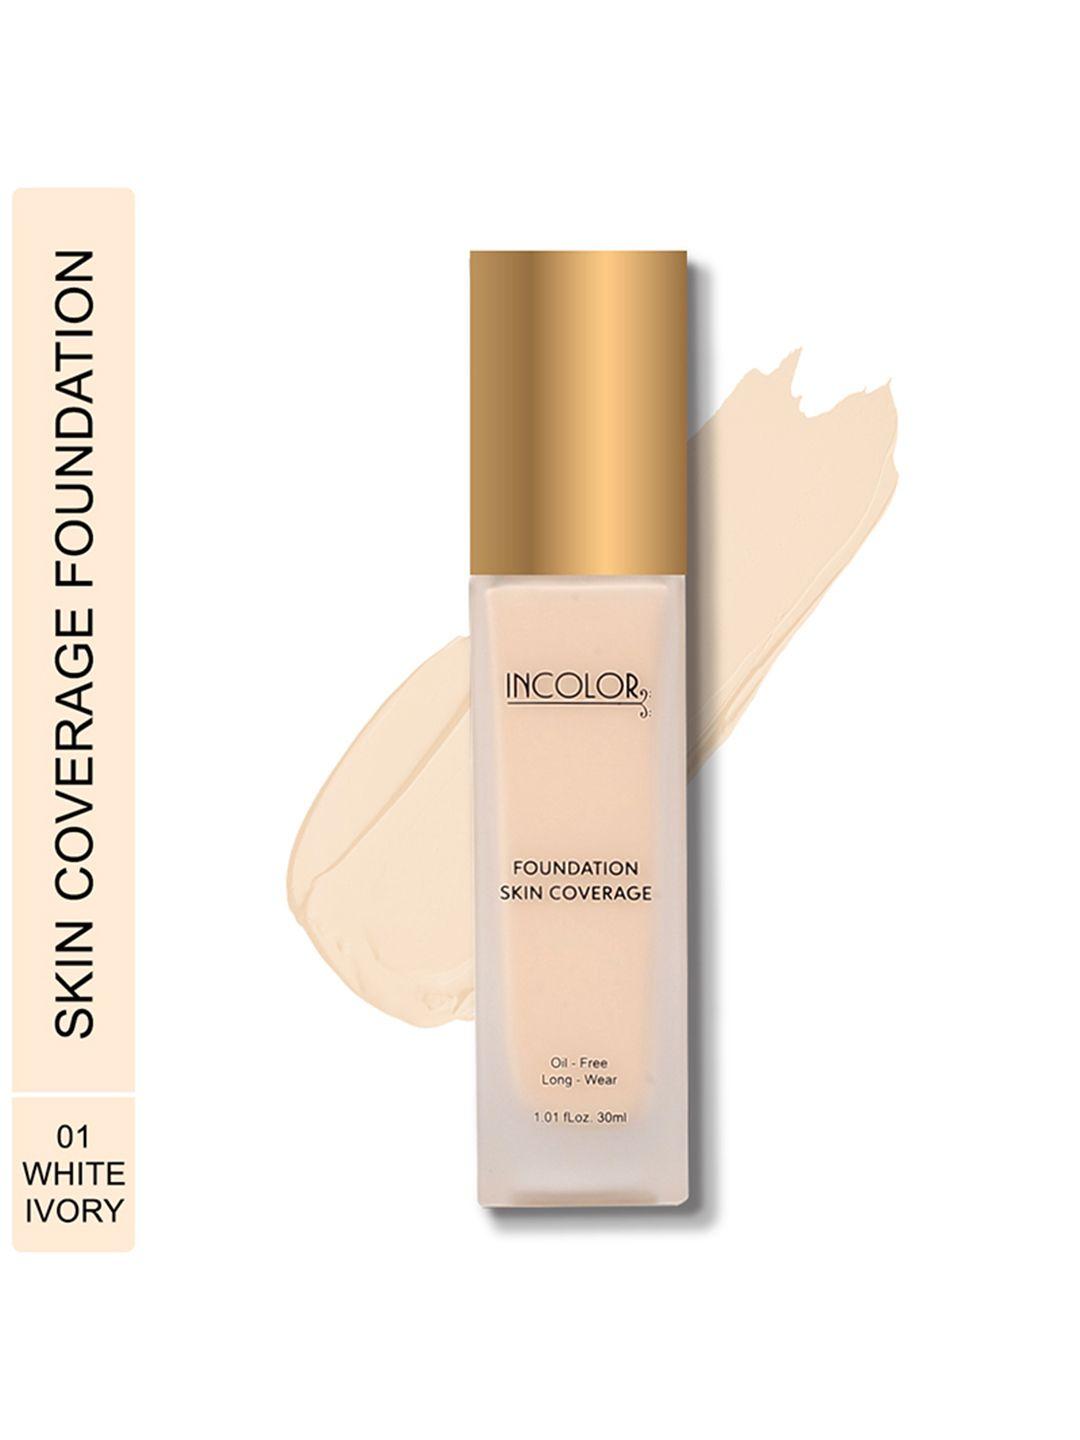 incolor foundation skin coverage - 30 ml 01 white ivory